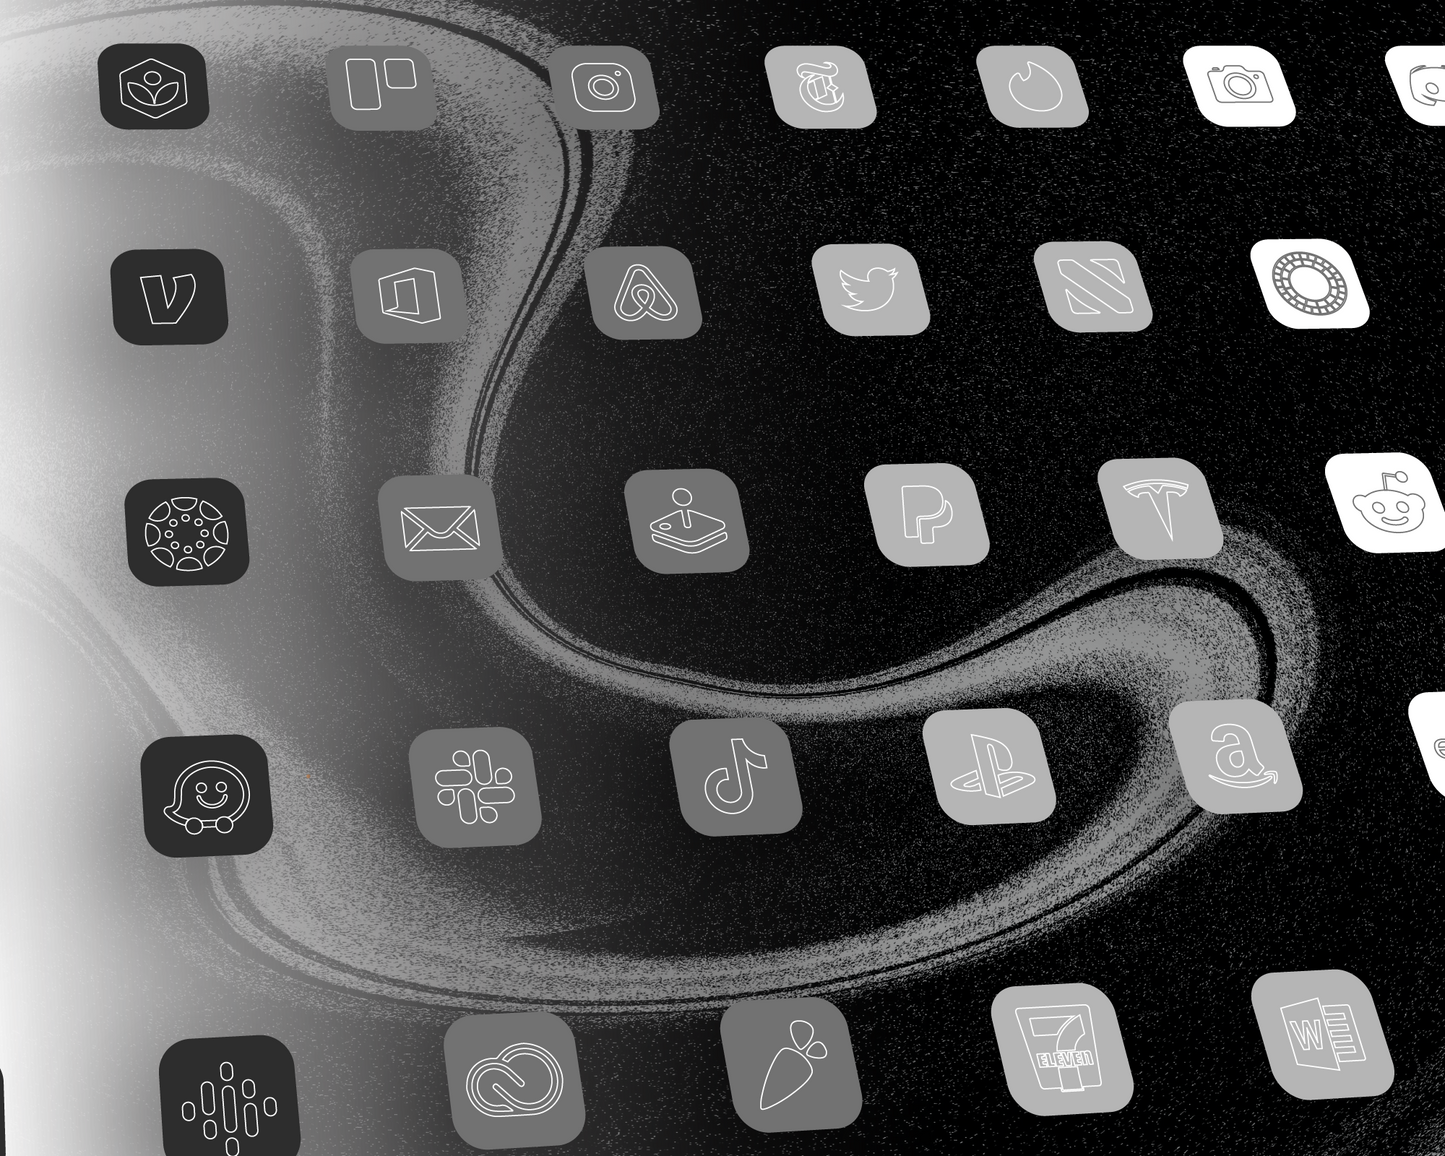 Outlined Grayscale App Icon Pack for iOS